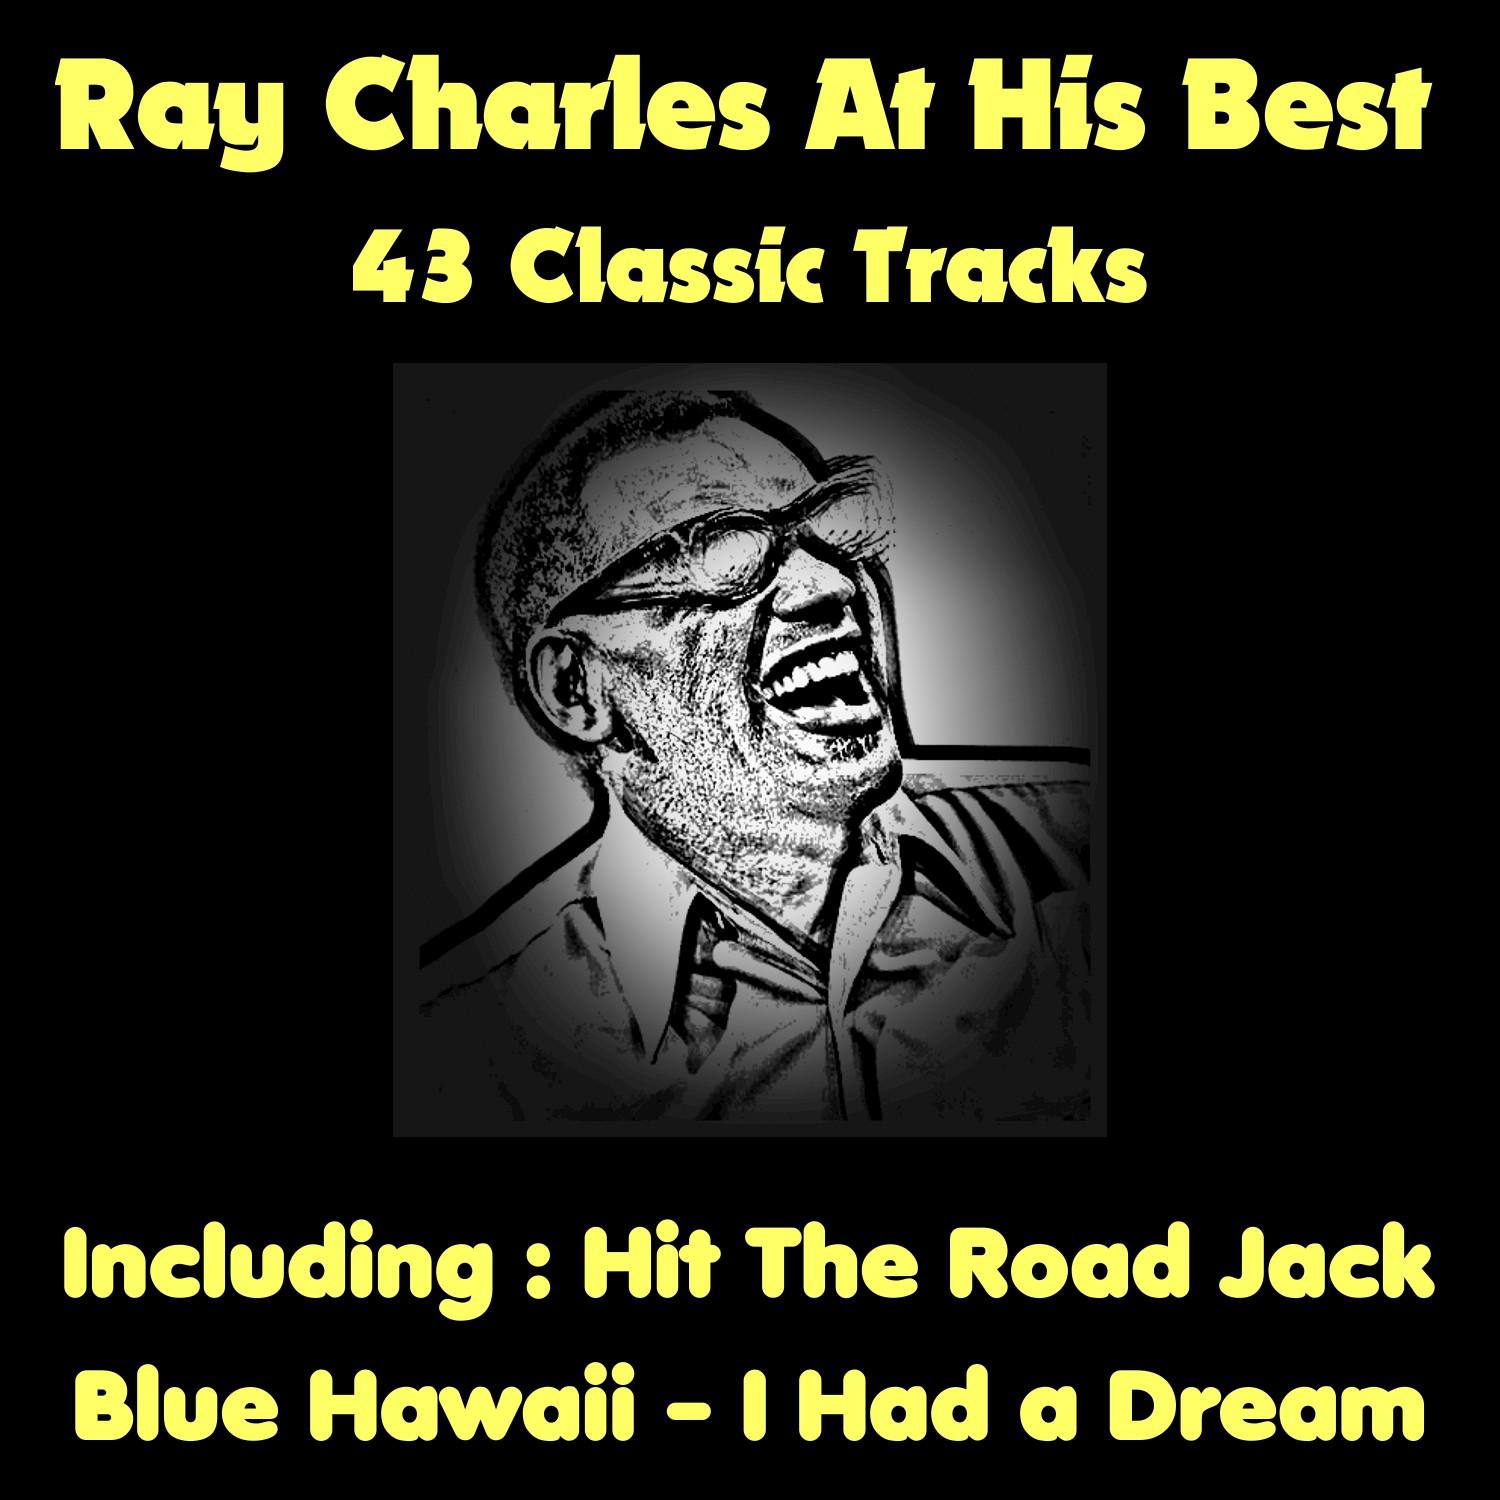 Ray Charles At His Best (43 Classic Tracks)